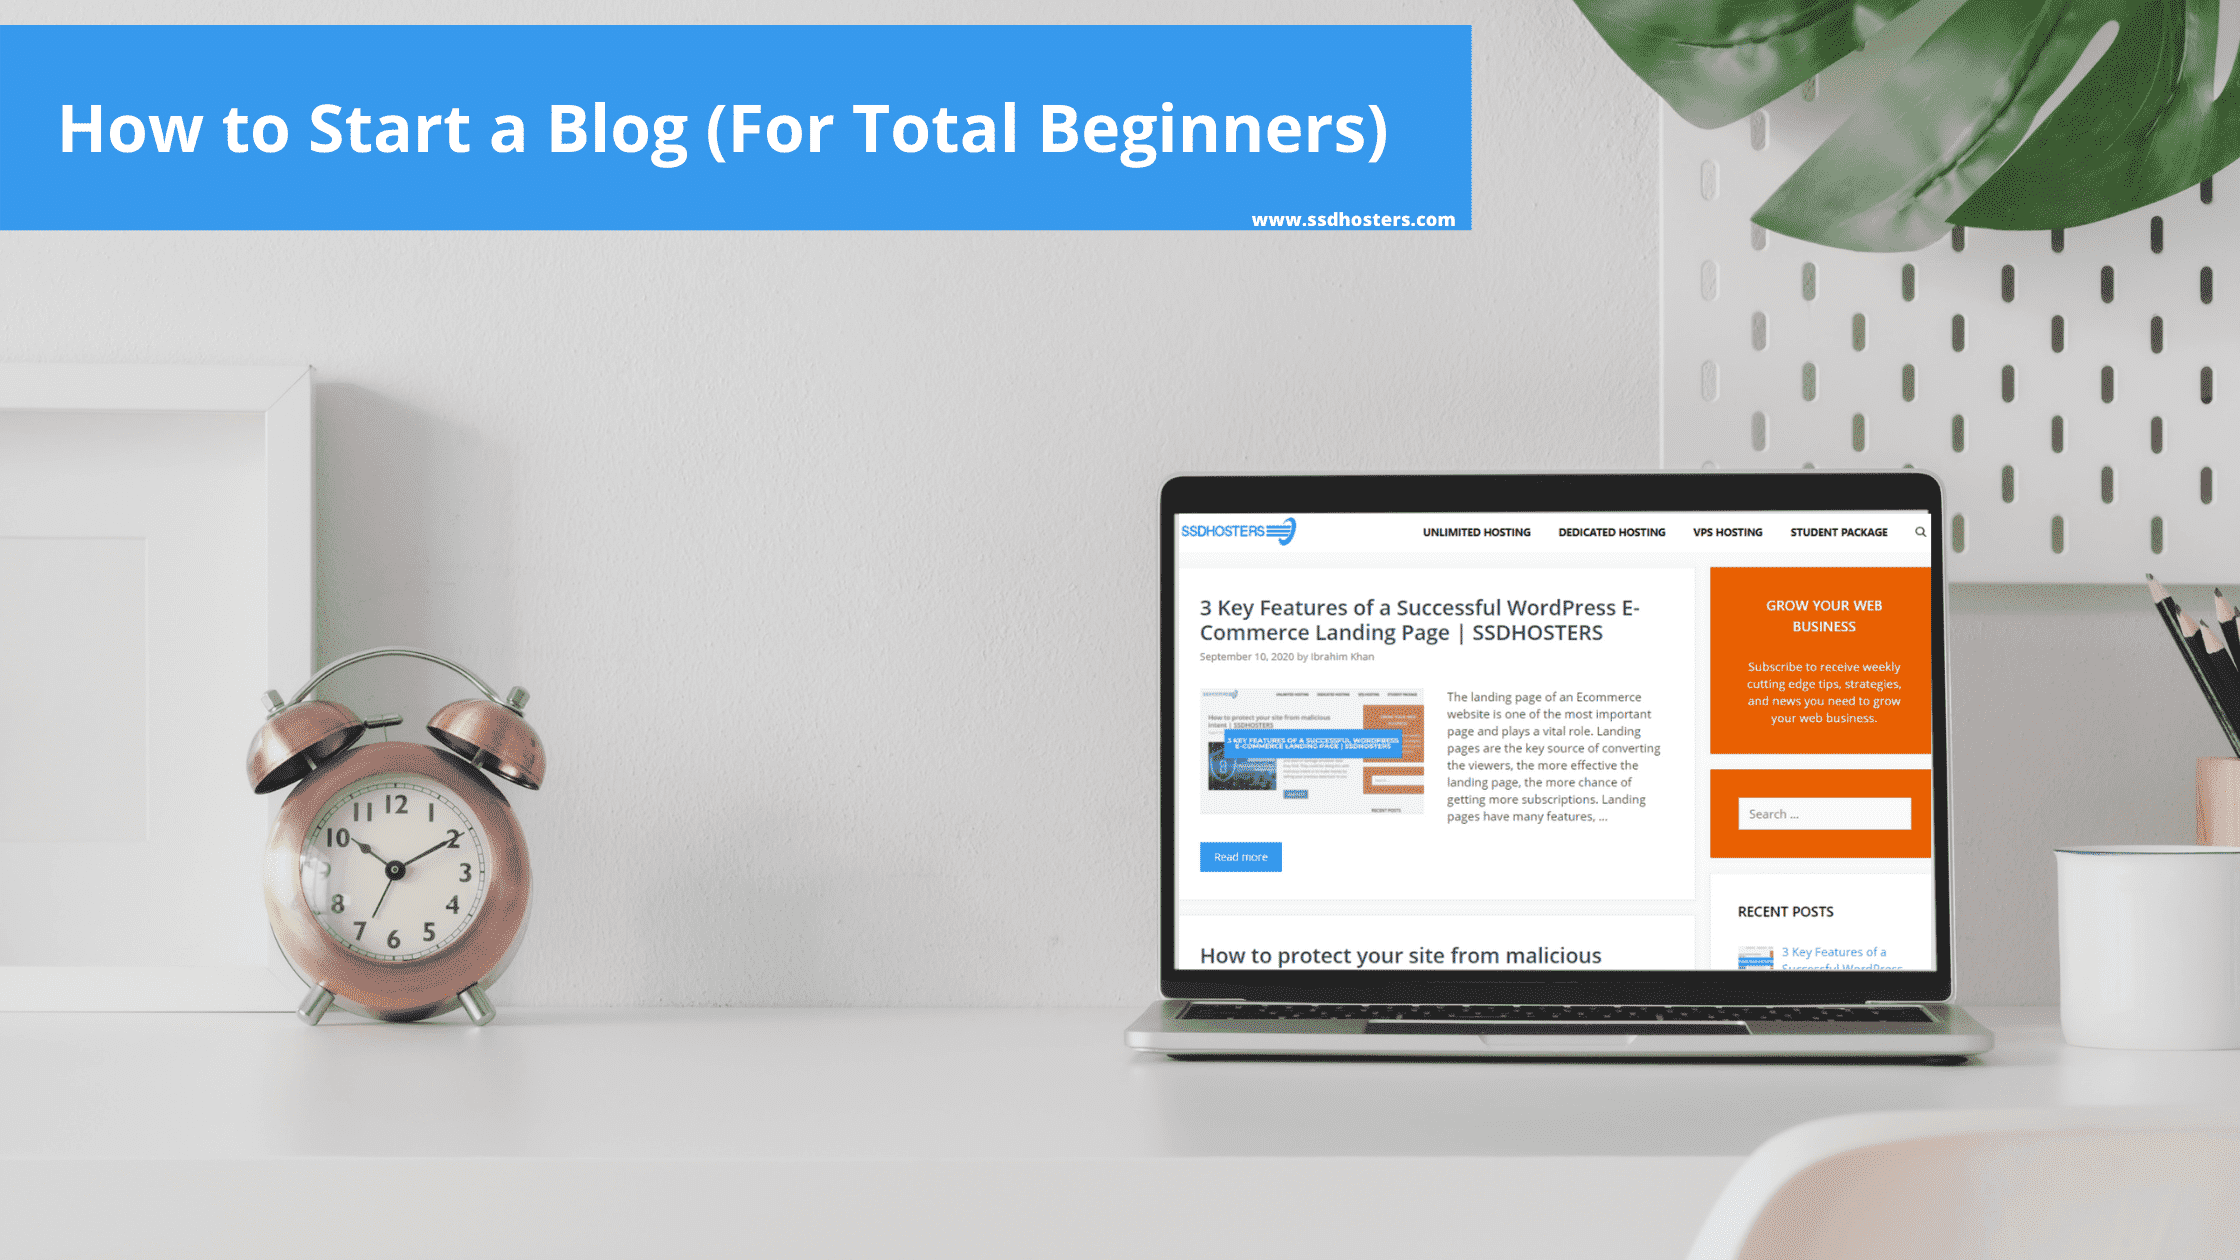 How to Start a Blog (For Total Beginners) | SSDHOSTERS